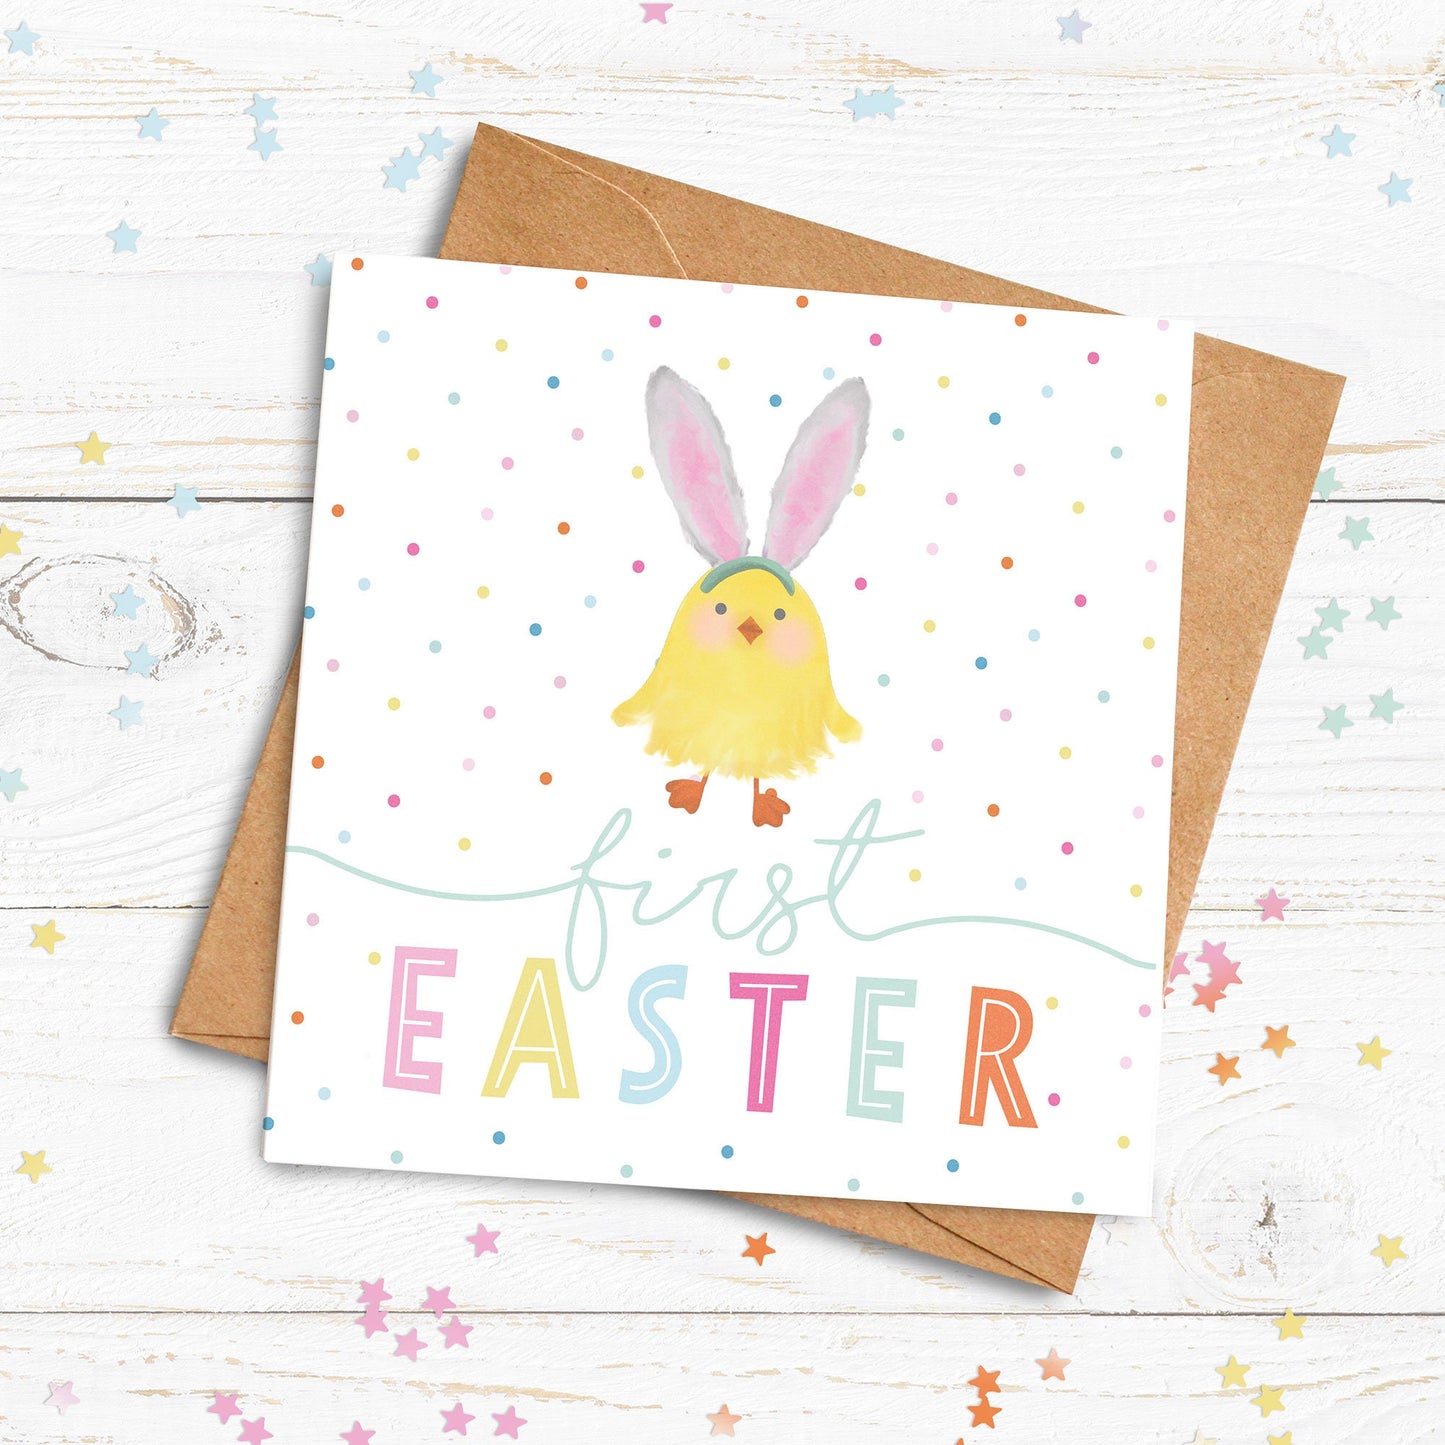 First Easter Personalised Card. Happy Easter Card. Personalised Easter Card. Cute Easter Chick Card. Baby Easter. Send Direct Option.